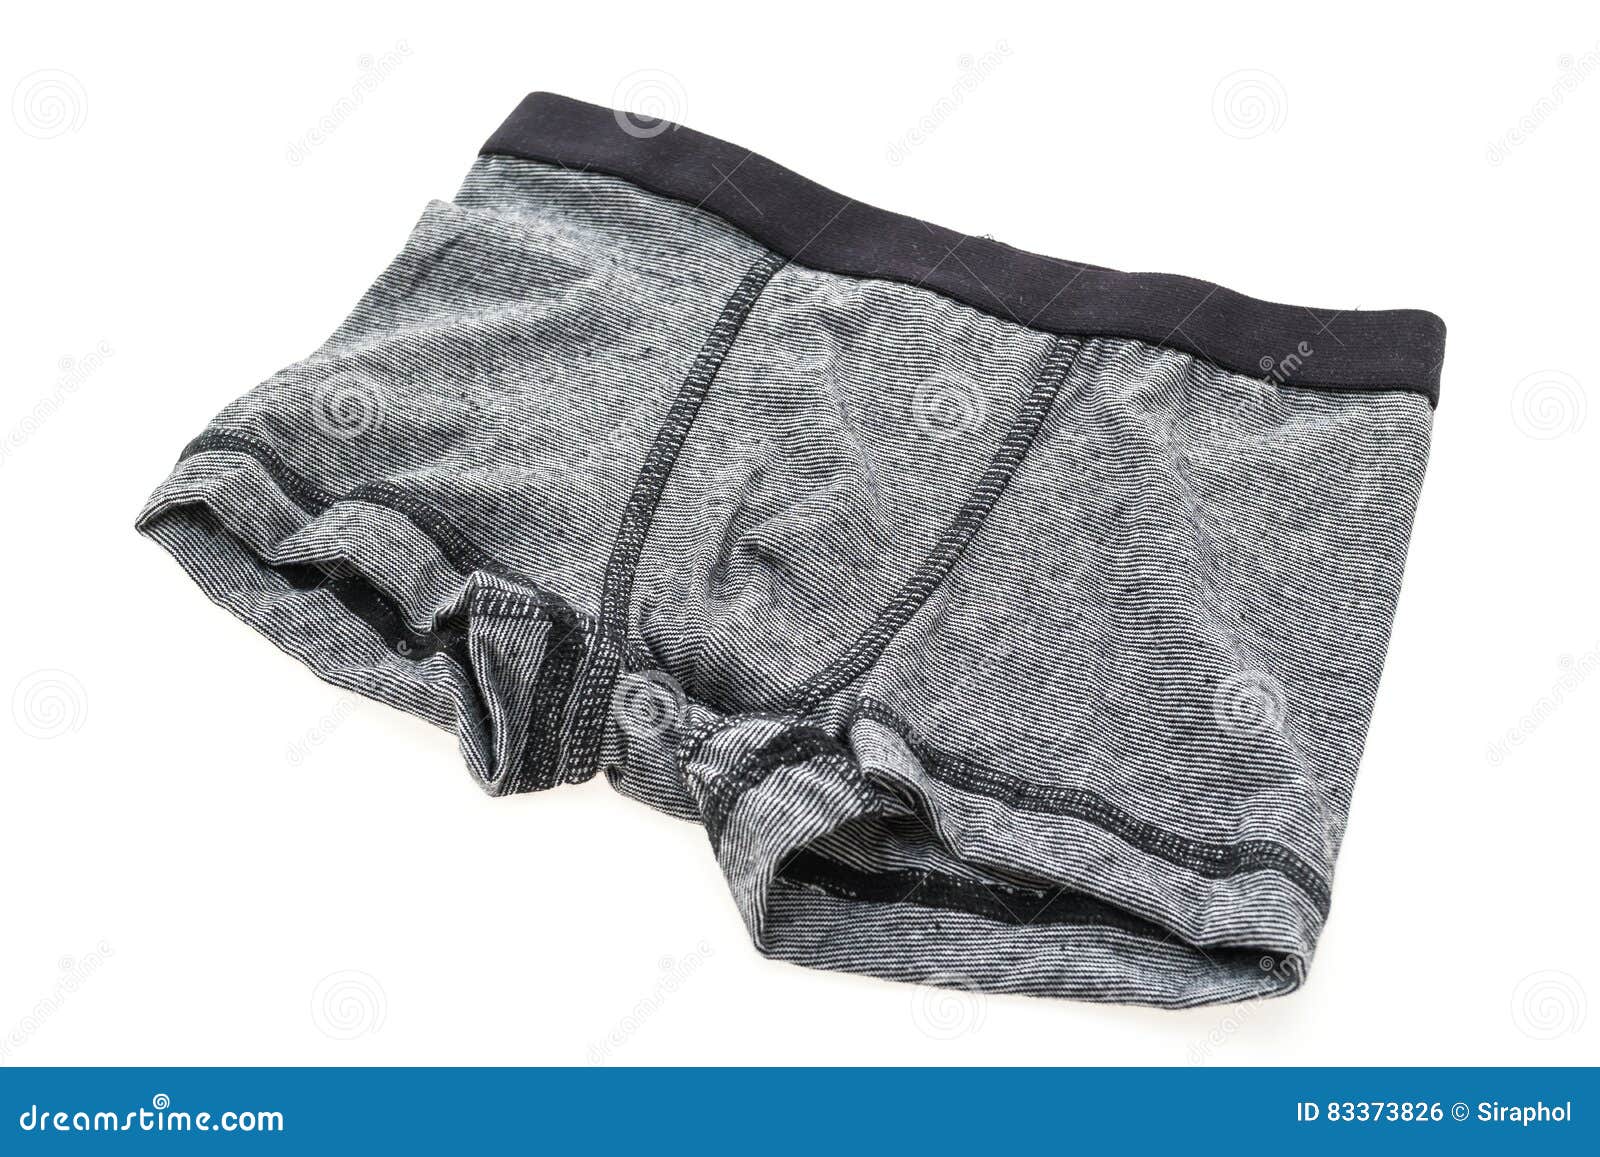 Underwear stock photo. Image of clean, fashion, underpants - 83373826